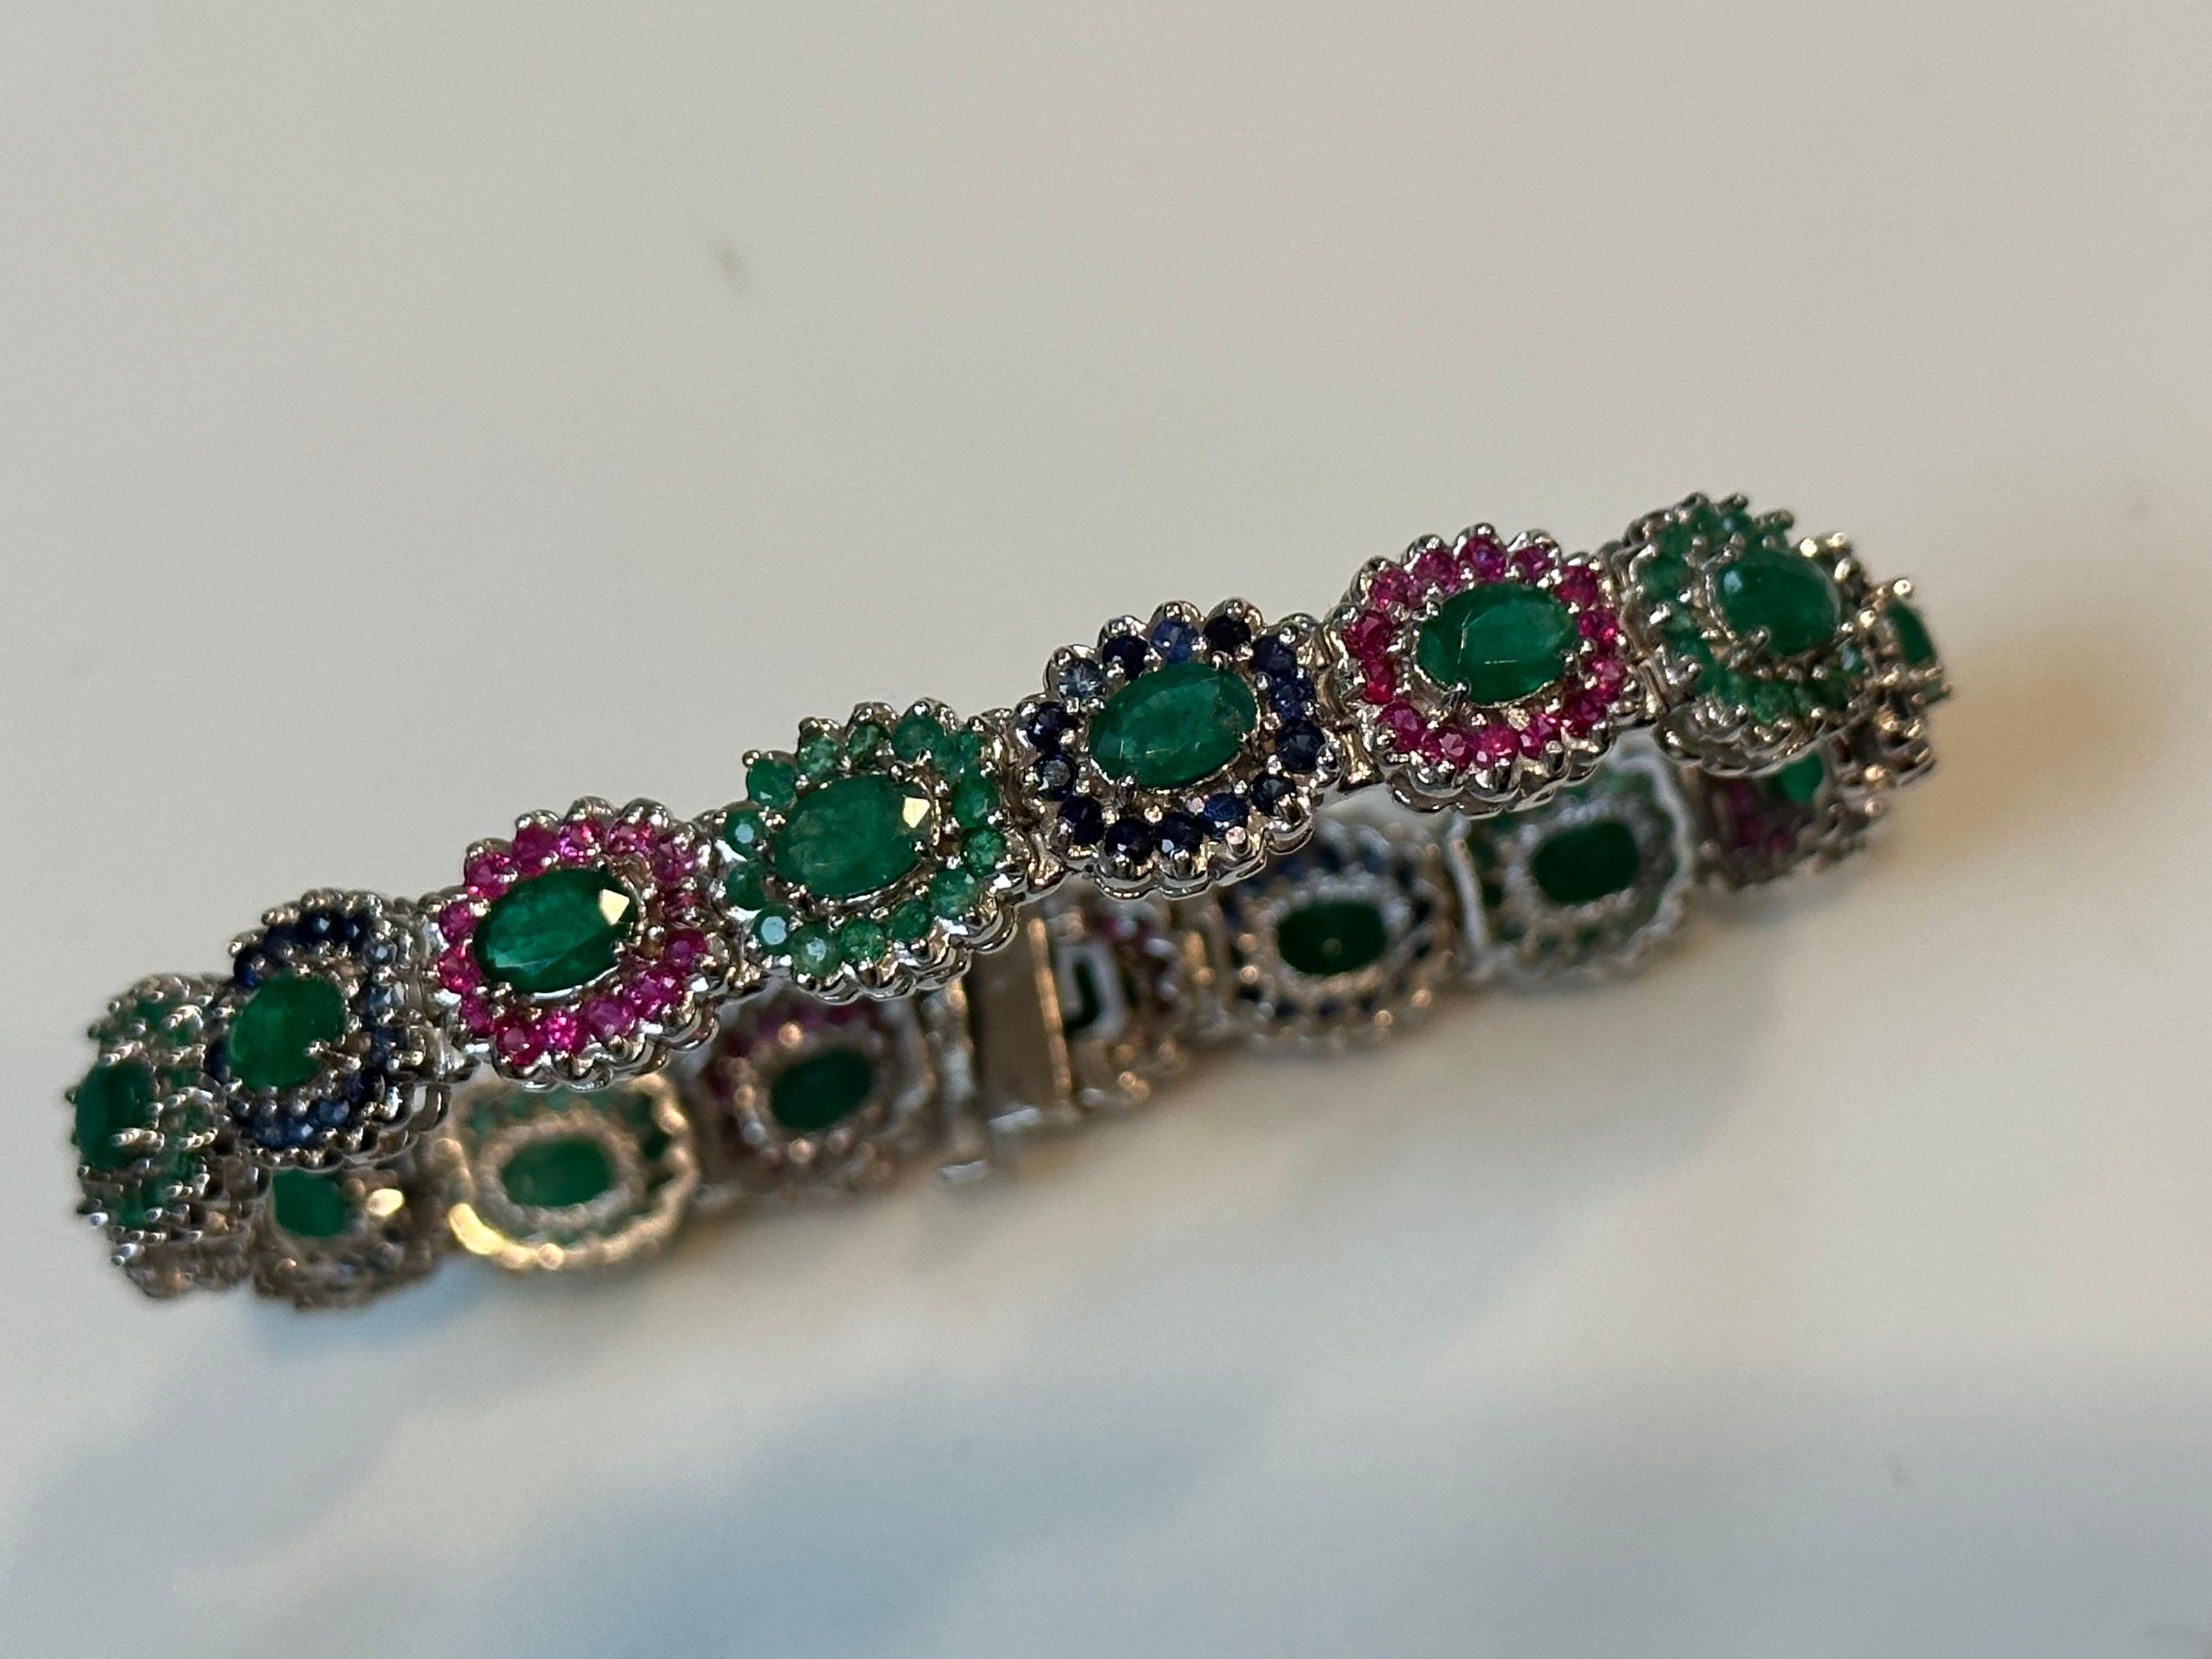 8 Ct Oval Cut Emerald & Ruby & Sapphire Tennis Bracelet 14 Kt White Gold 25.5Gm For Sale 11